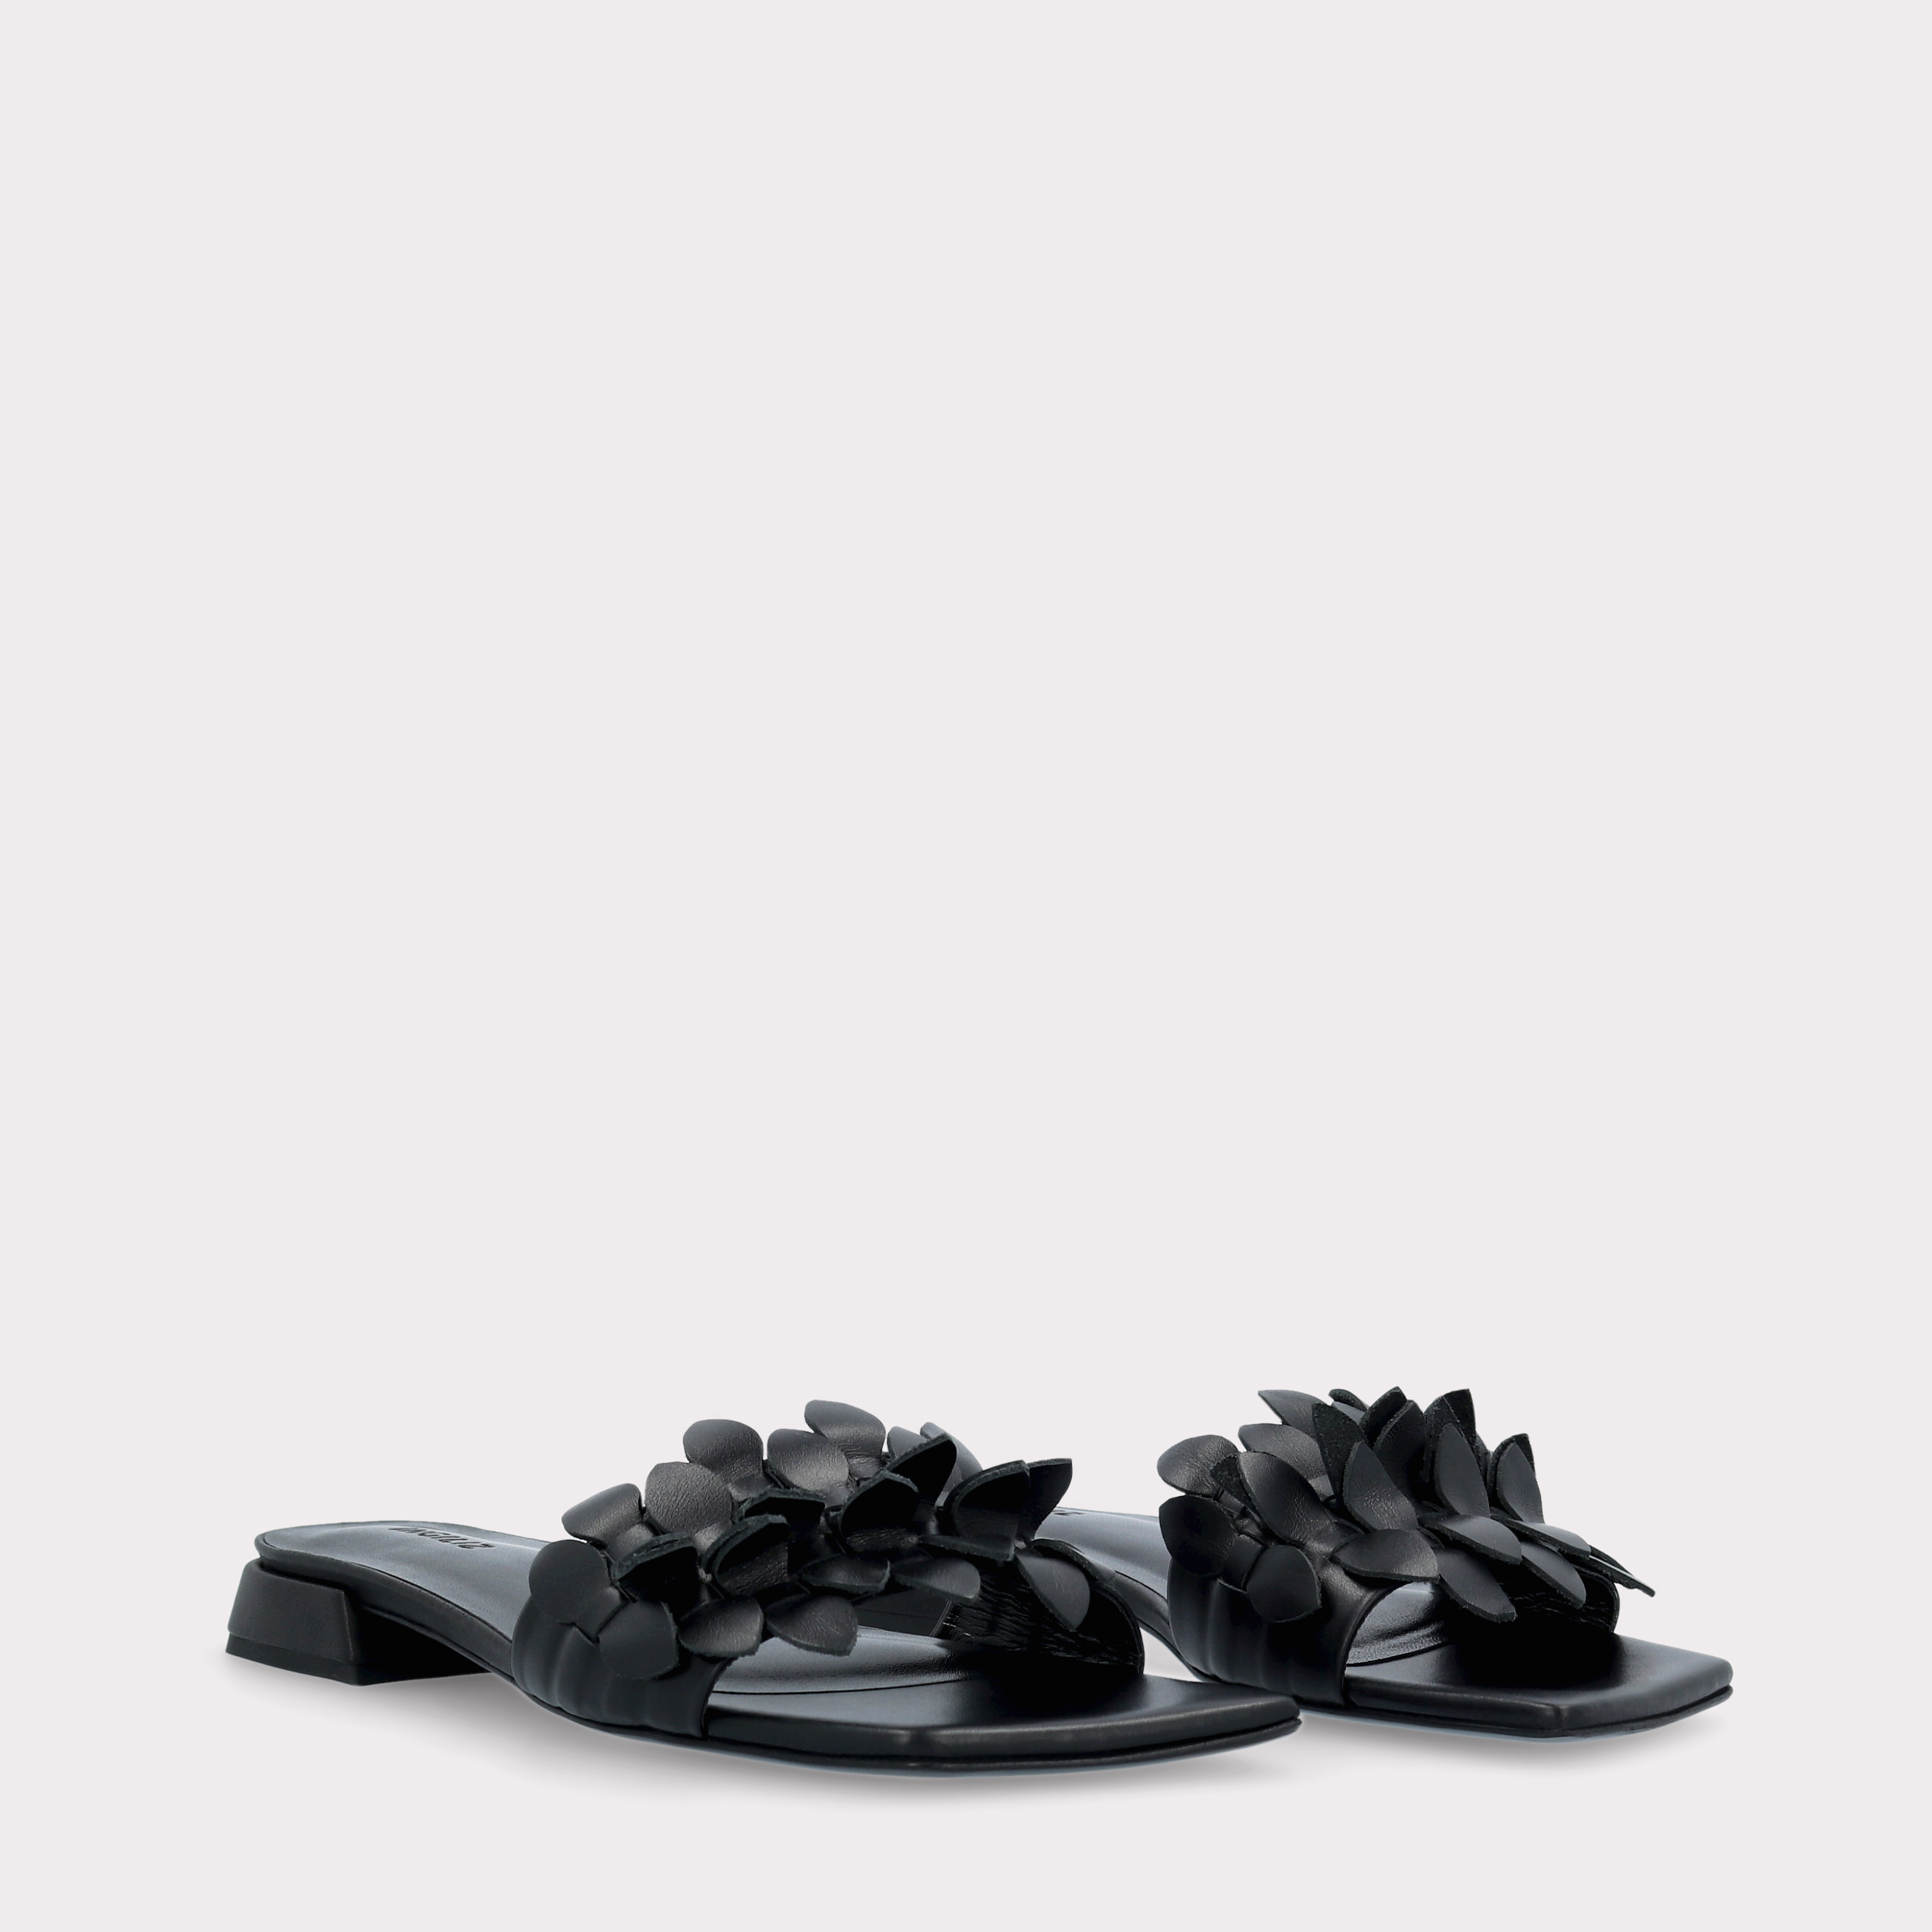 POLLY 01 BLACK LEATHER MULES